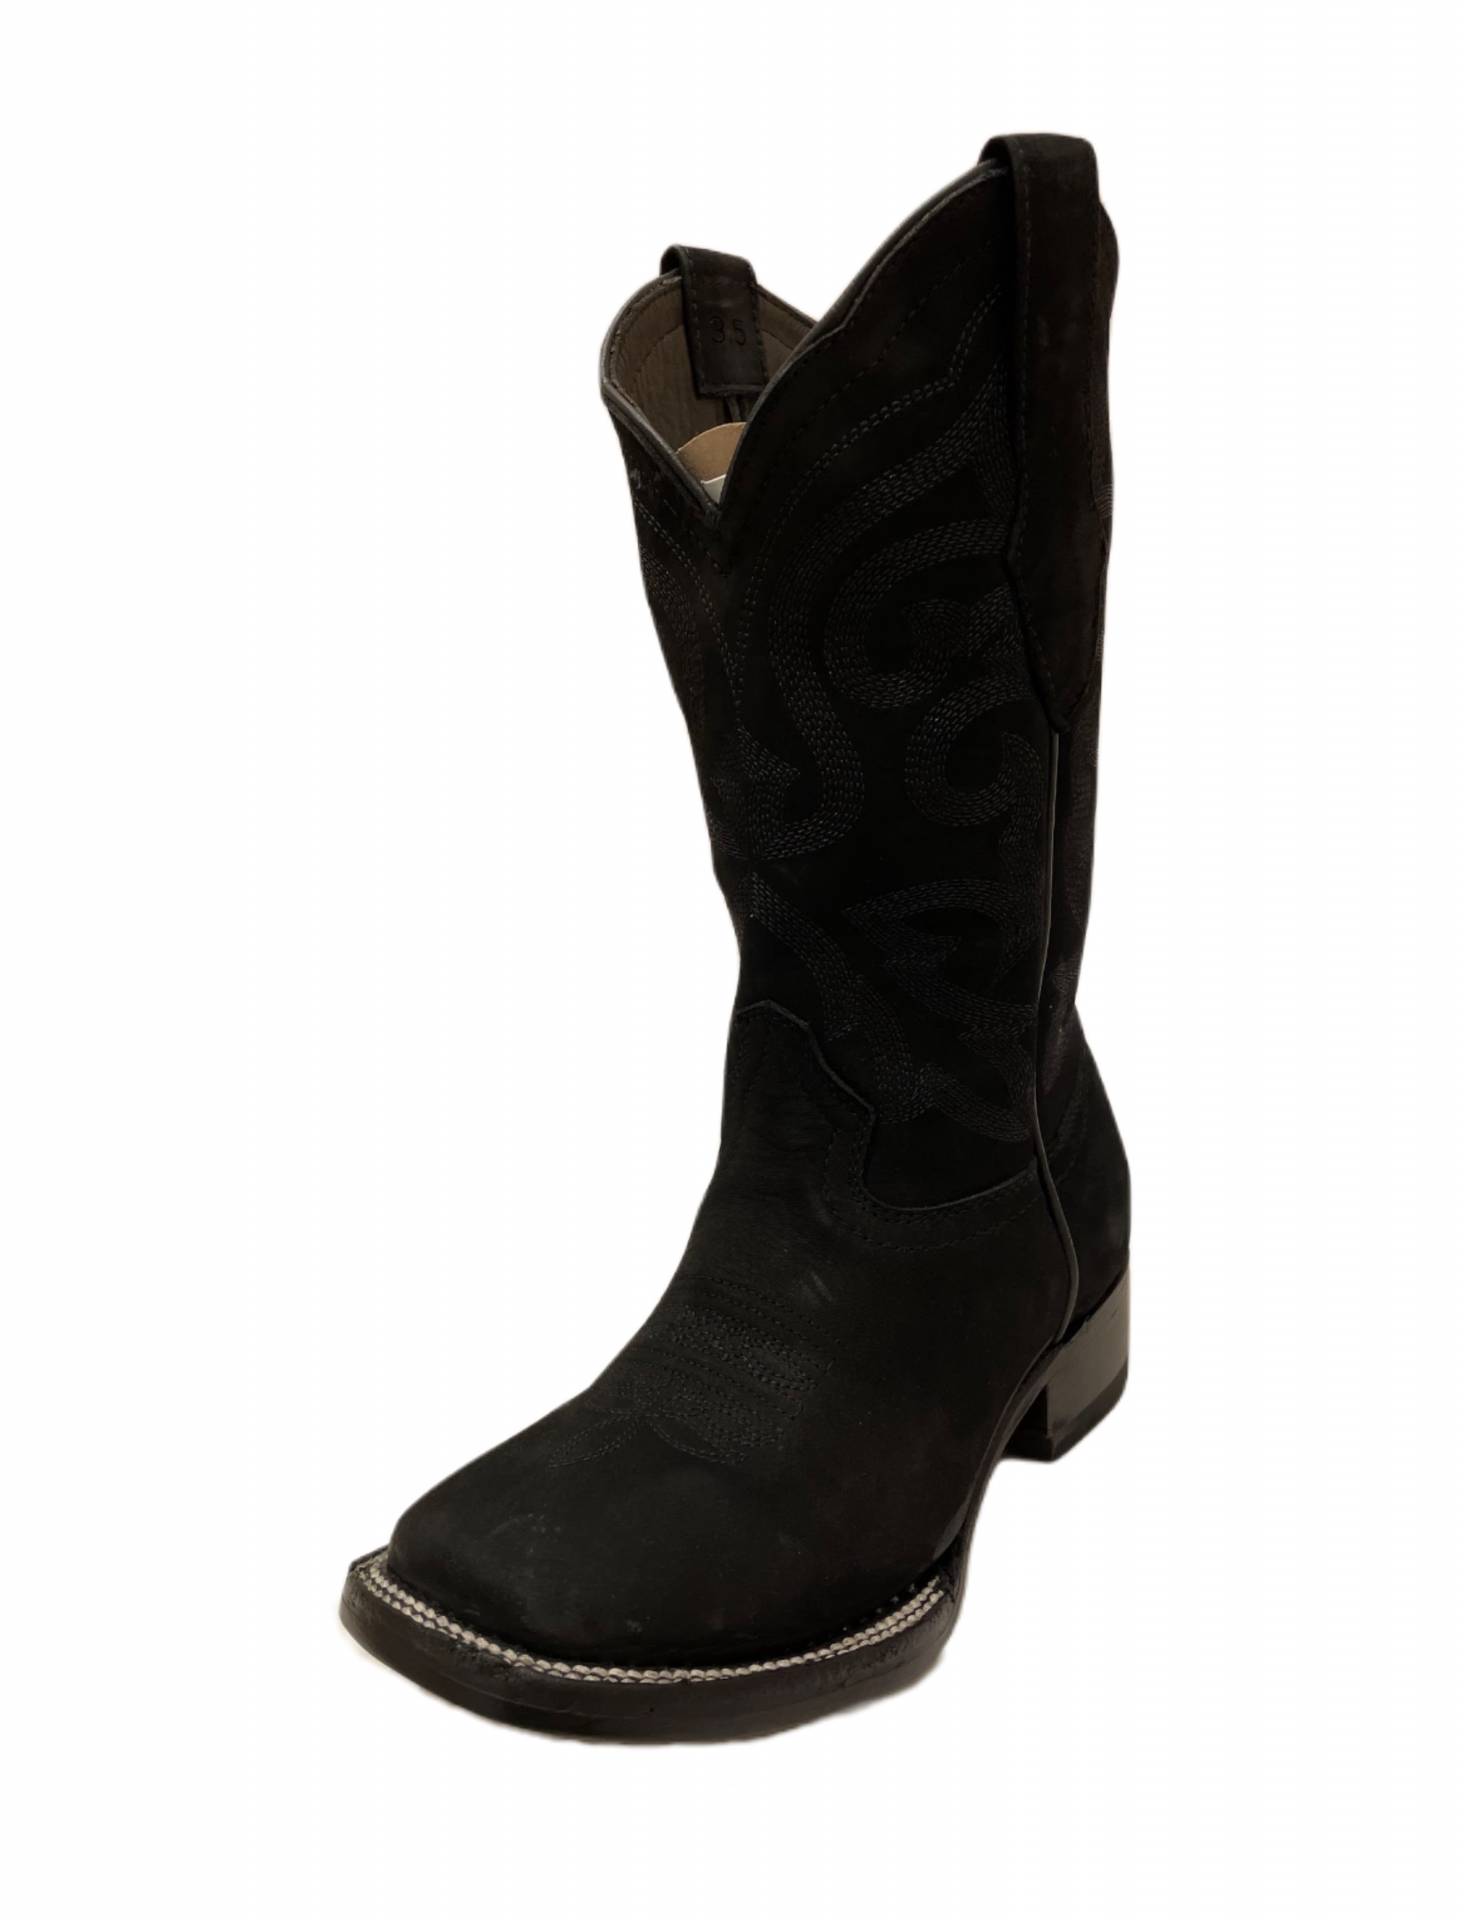 YOUTH D&A BOOT CO. NOBUCK BLACK BOOT | Rugged Cowboy